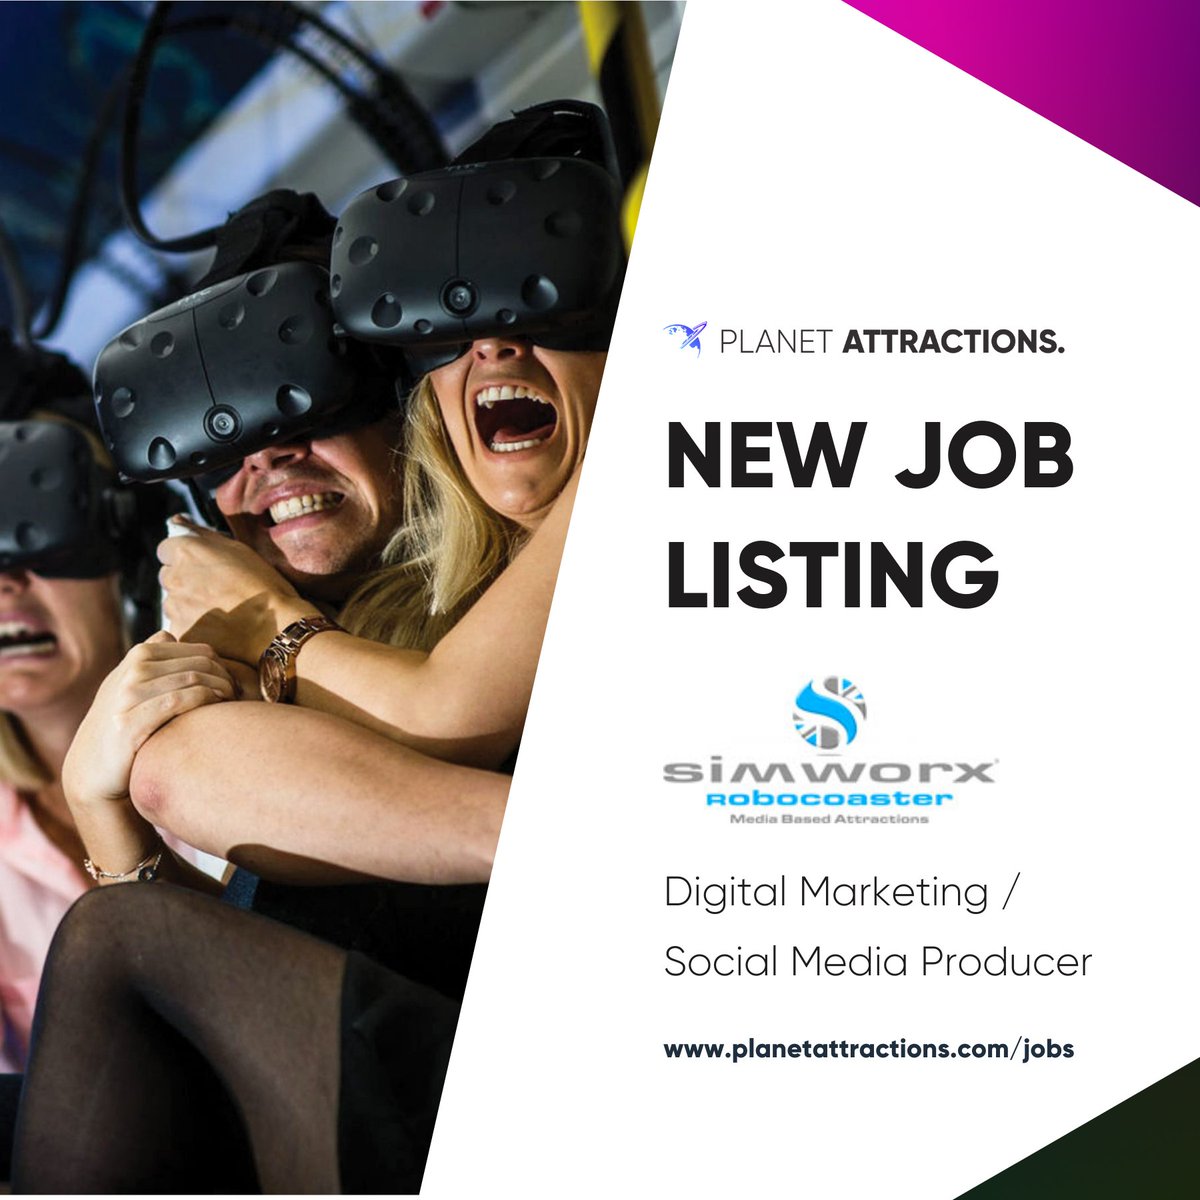 #JOB: A great opportunity to work at @Simworx! APPLY NOW: planetattractions.com/jobs #jobsearch | #career | #recruitment | #attractions